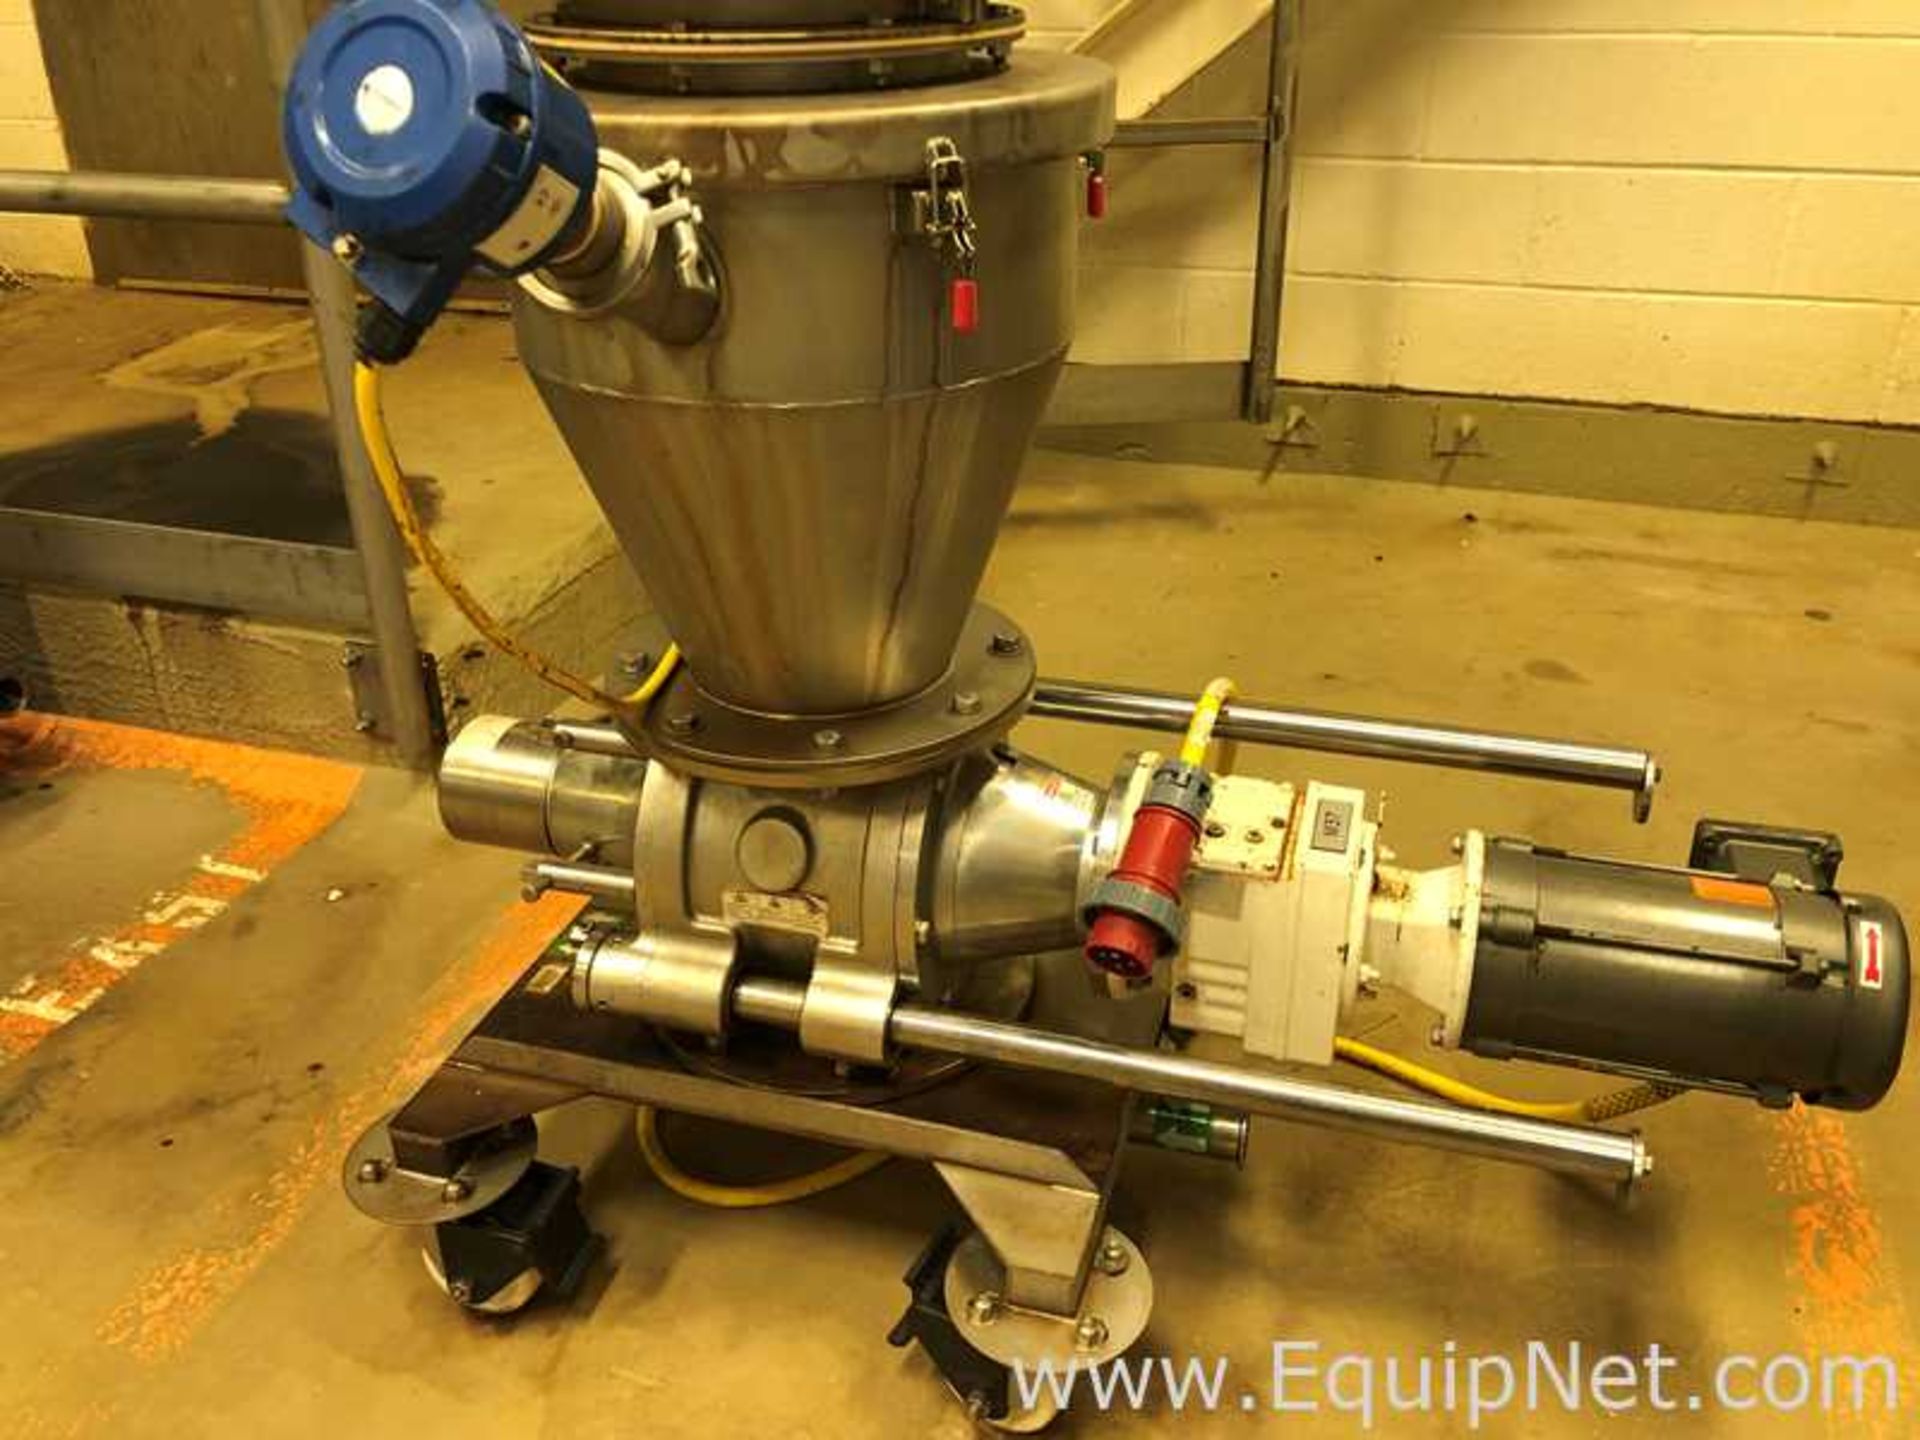 One Vacuum Conveyor System Vac-U-Max With Hopper And One Rotary Valve - Image 3 of 9